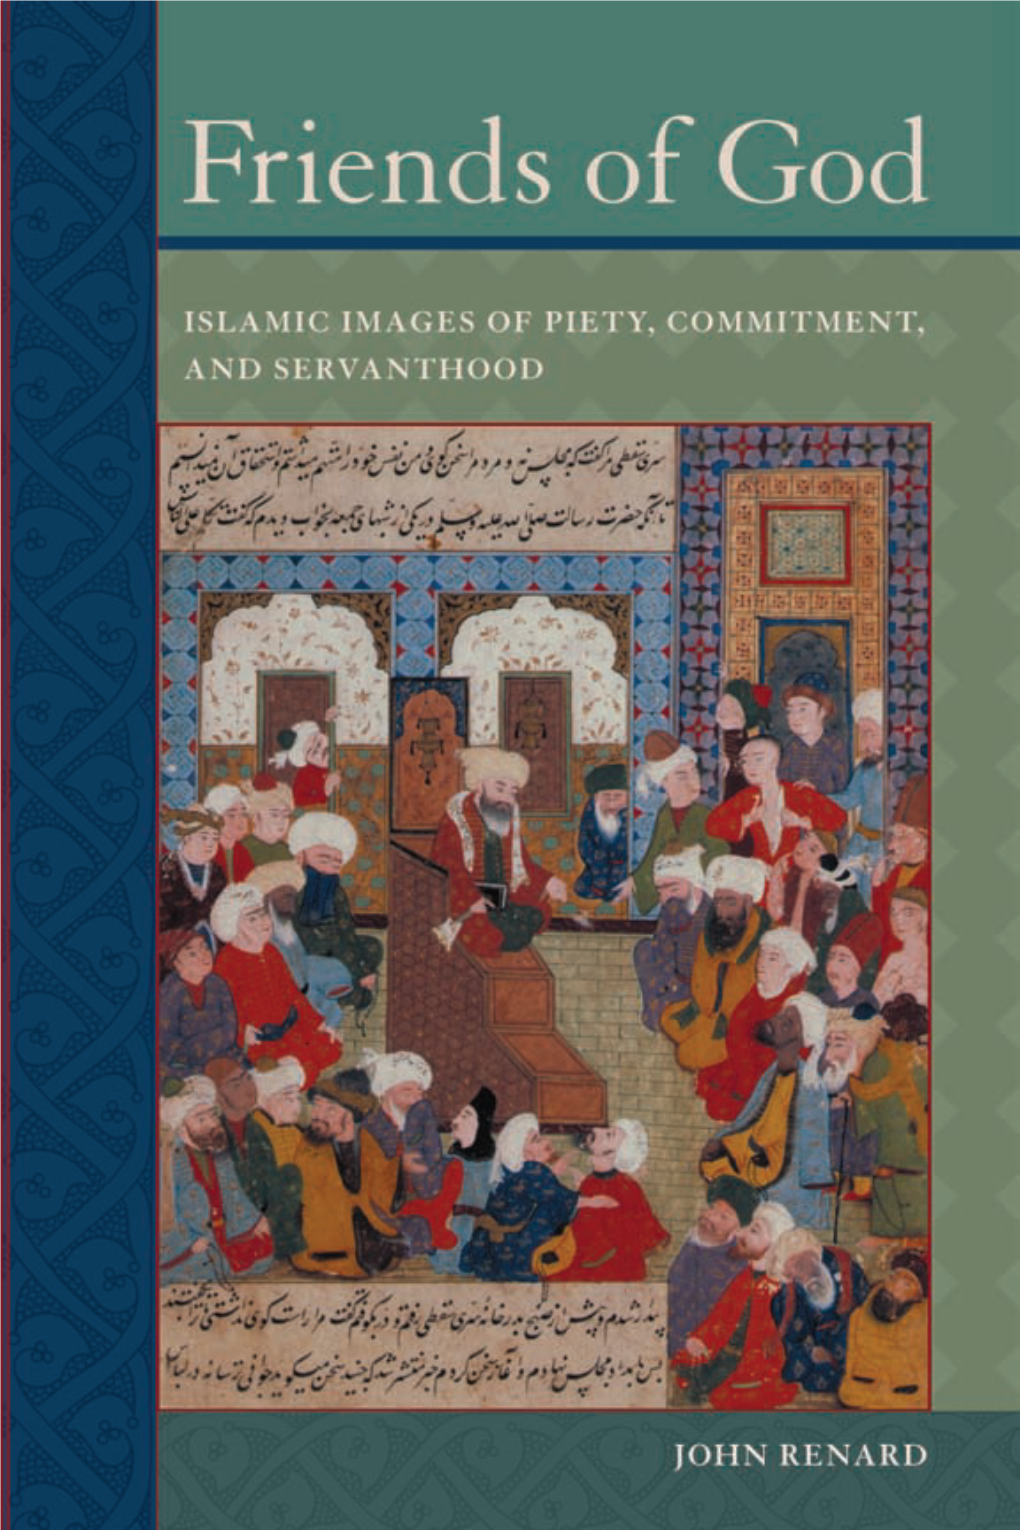 Islamic Images of Piety, Commitment, and Servanthood John Renard